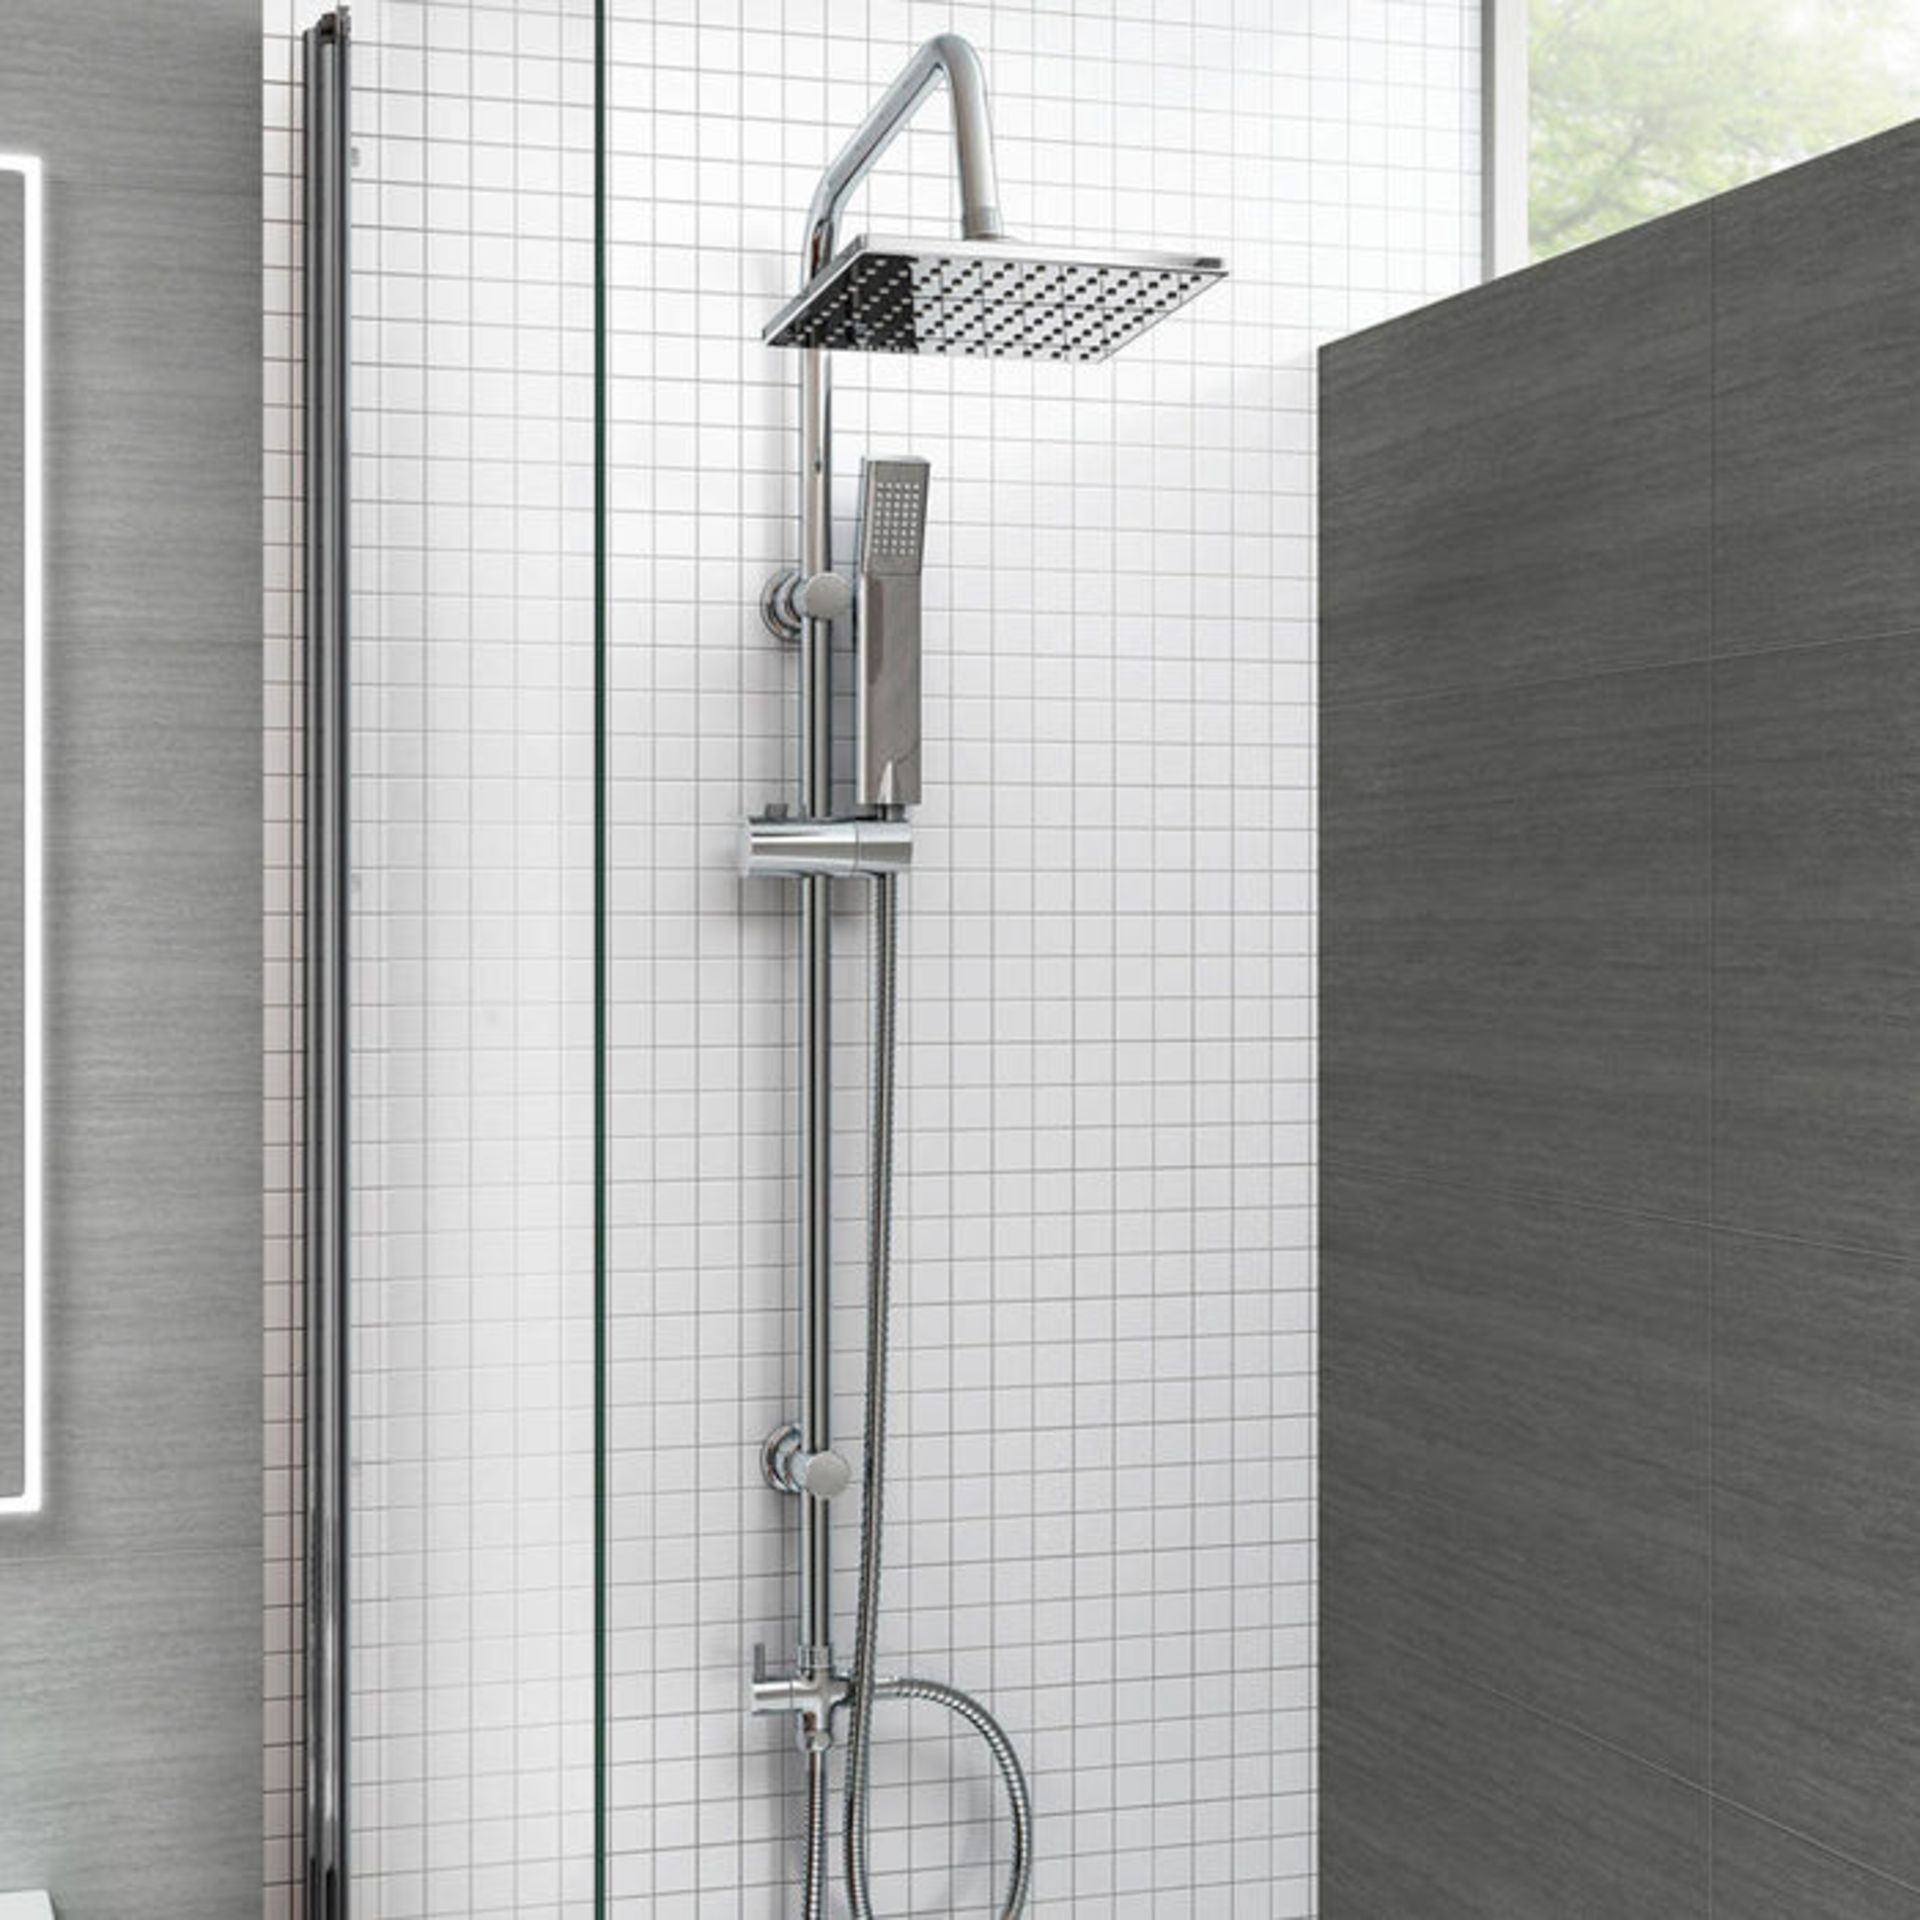 200mm Square Head, Riser Rail & Handheld Kit. Quality stainless steel shower head with Easy C...